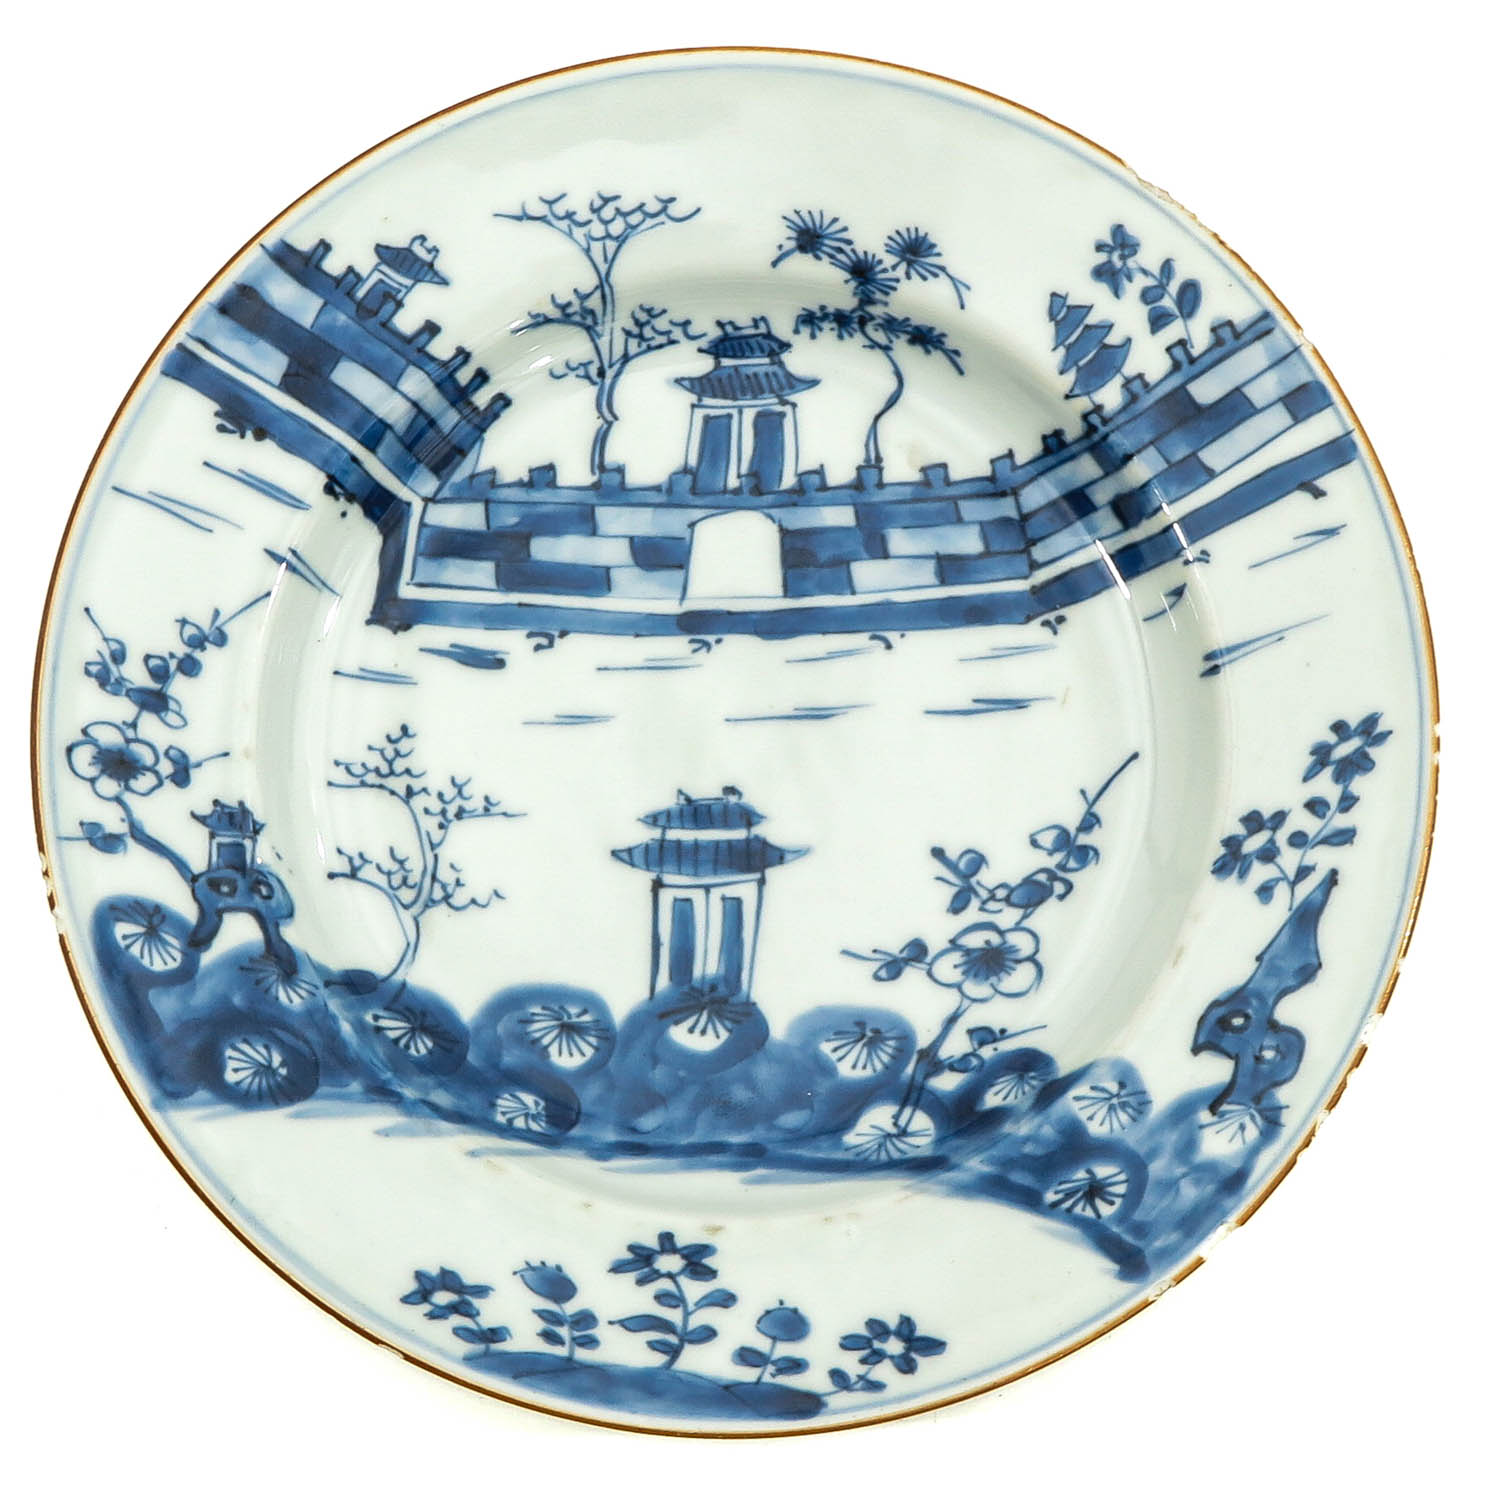 A Series of 5 Blue and White Plates - Image 7 of 10